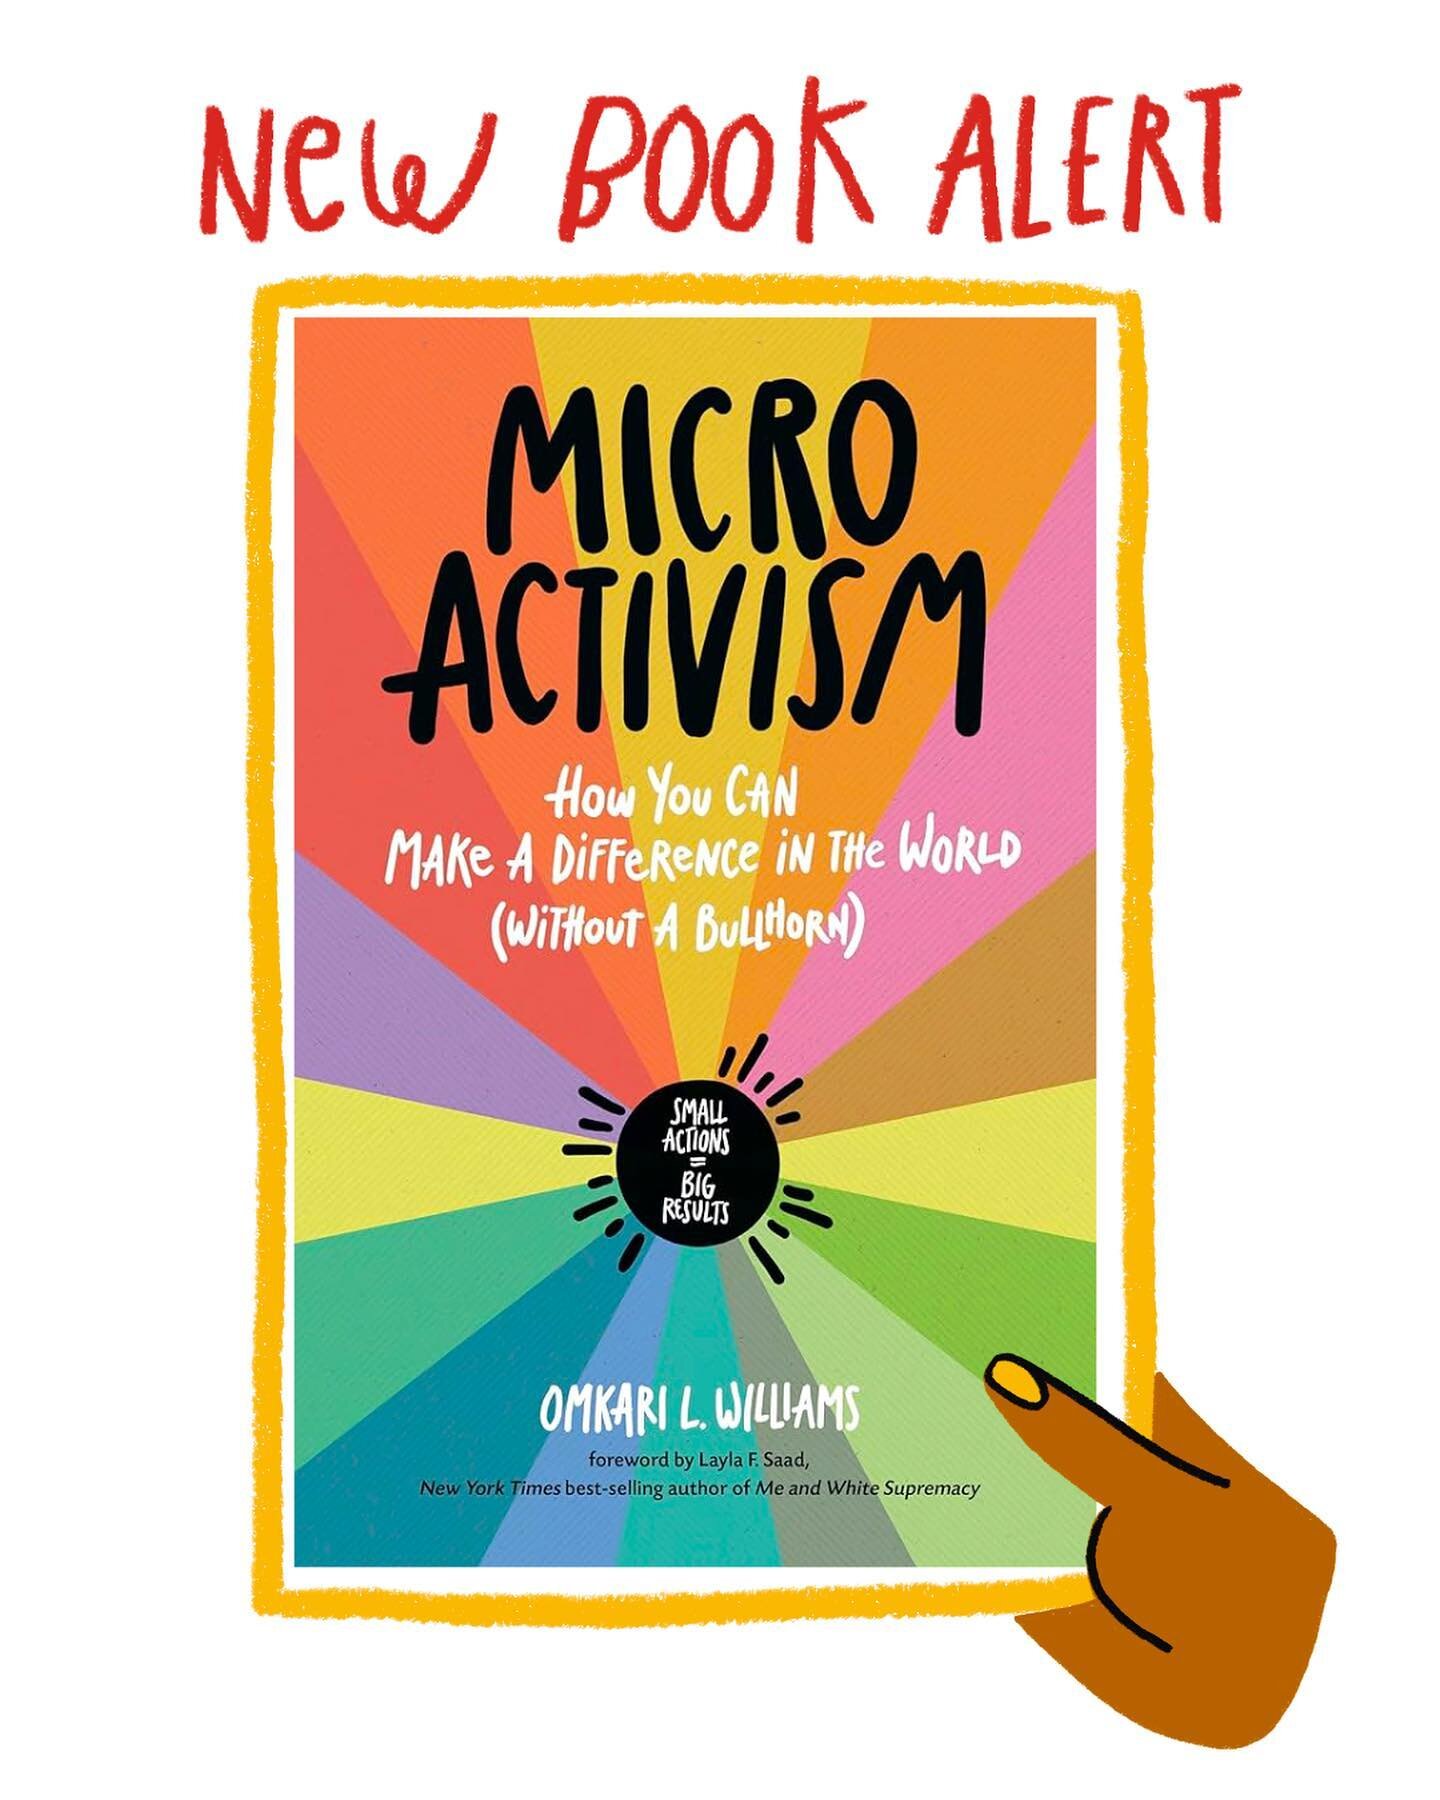 new book! @omkari_williams&rsquo; Micro Activism is now available. 

this book was a pleasure to work on last year and i&rsquo;m honored to use my art for something bigger. i love this book not just because of the art itself but the message. activism